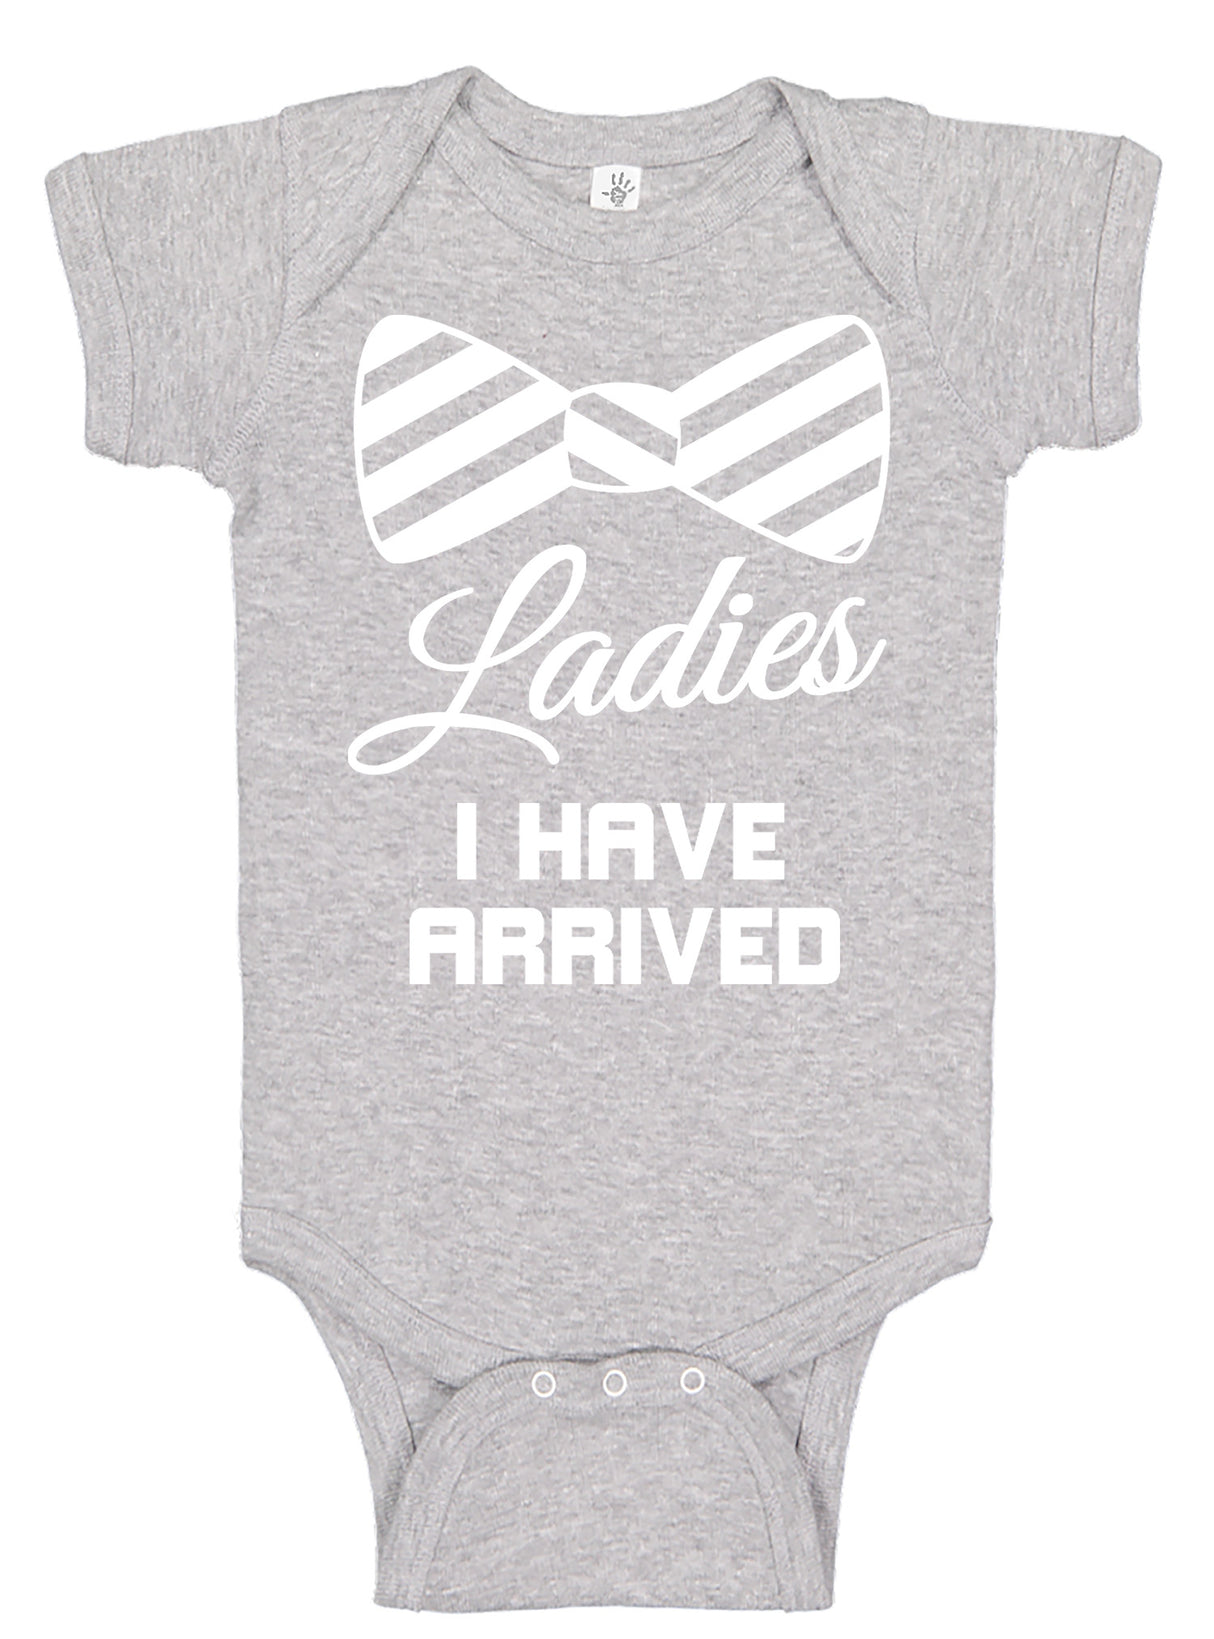 Aiden's Corner Funny Baby Boy Clothes - Ladies I Have Arrived Baby Boy  Bodysuit